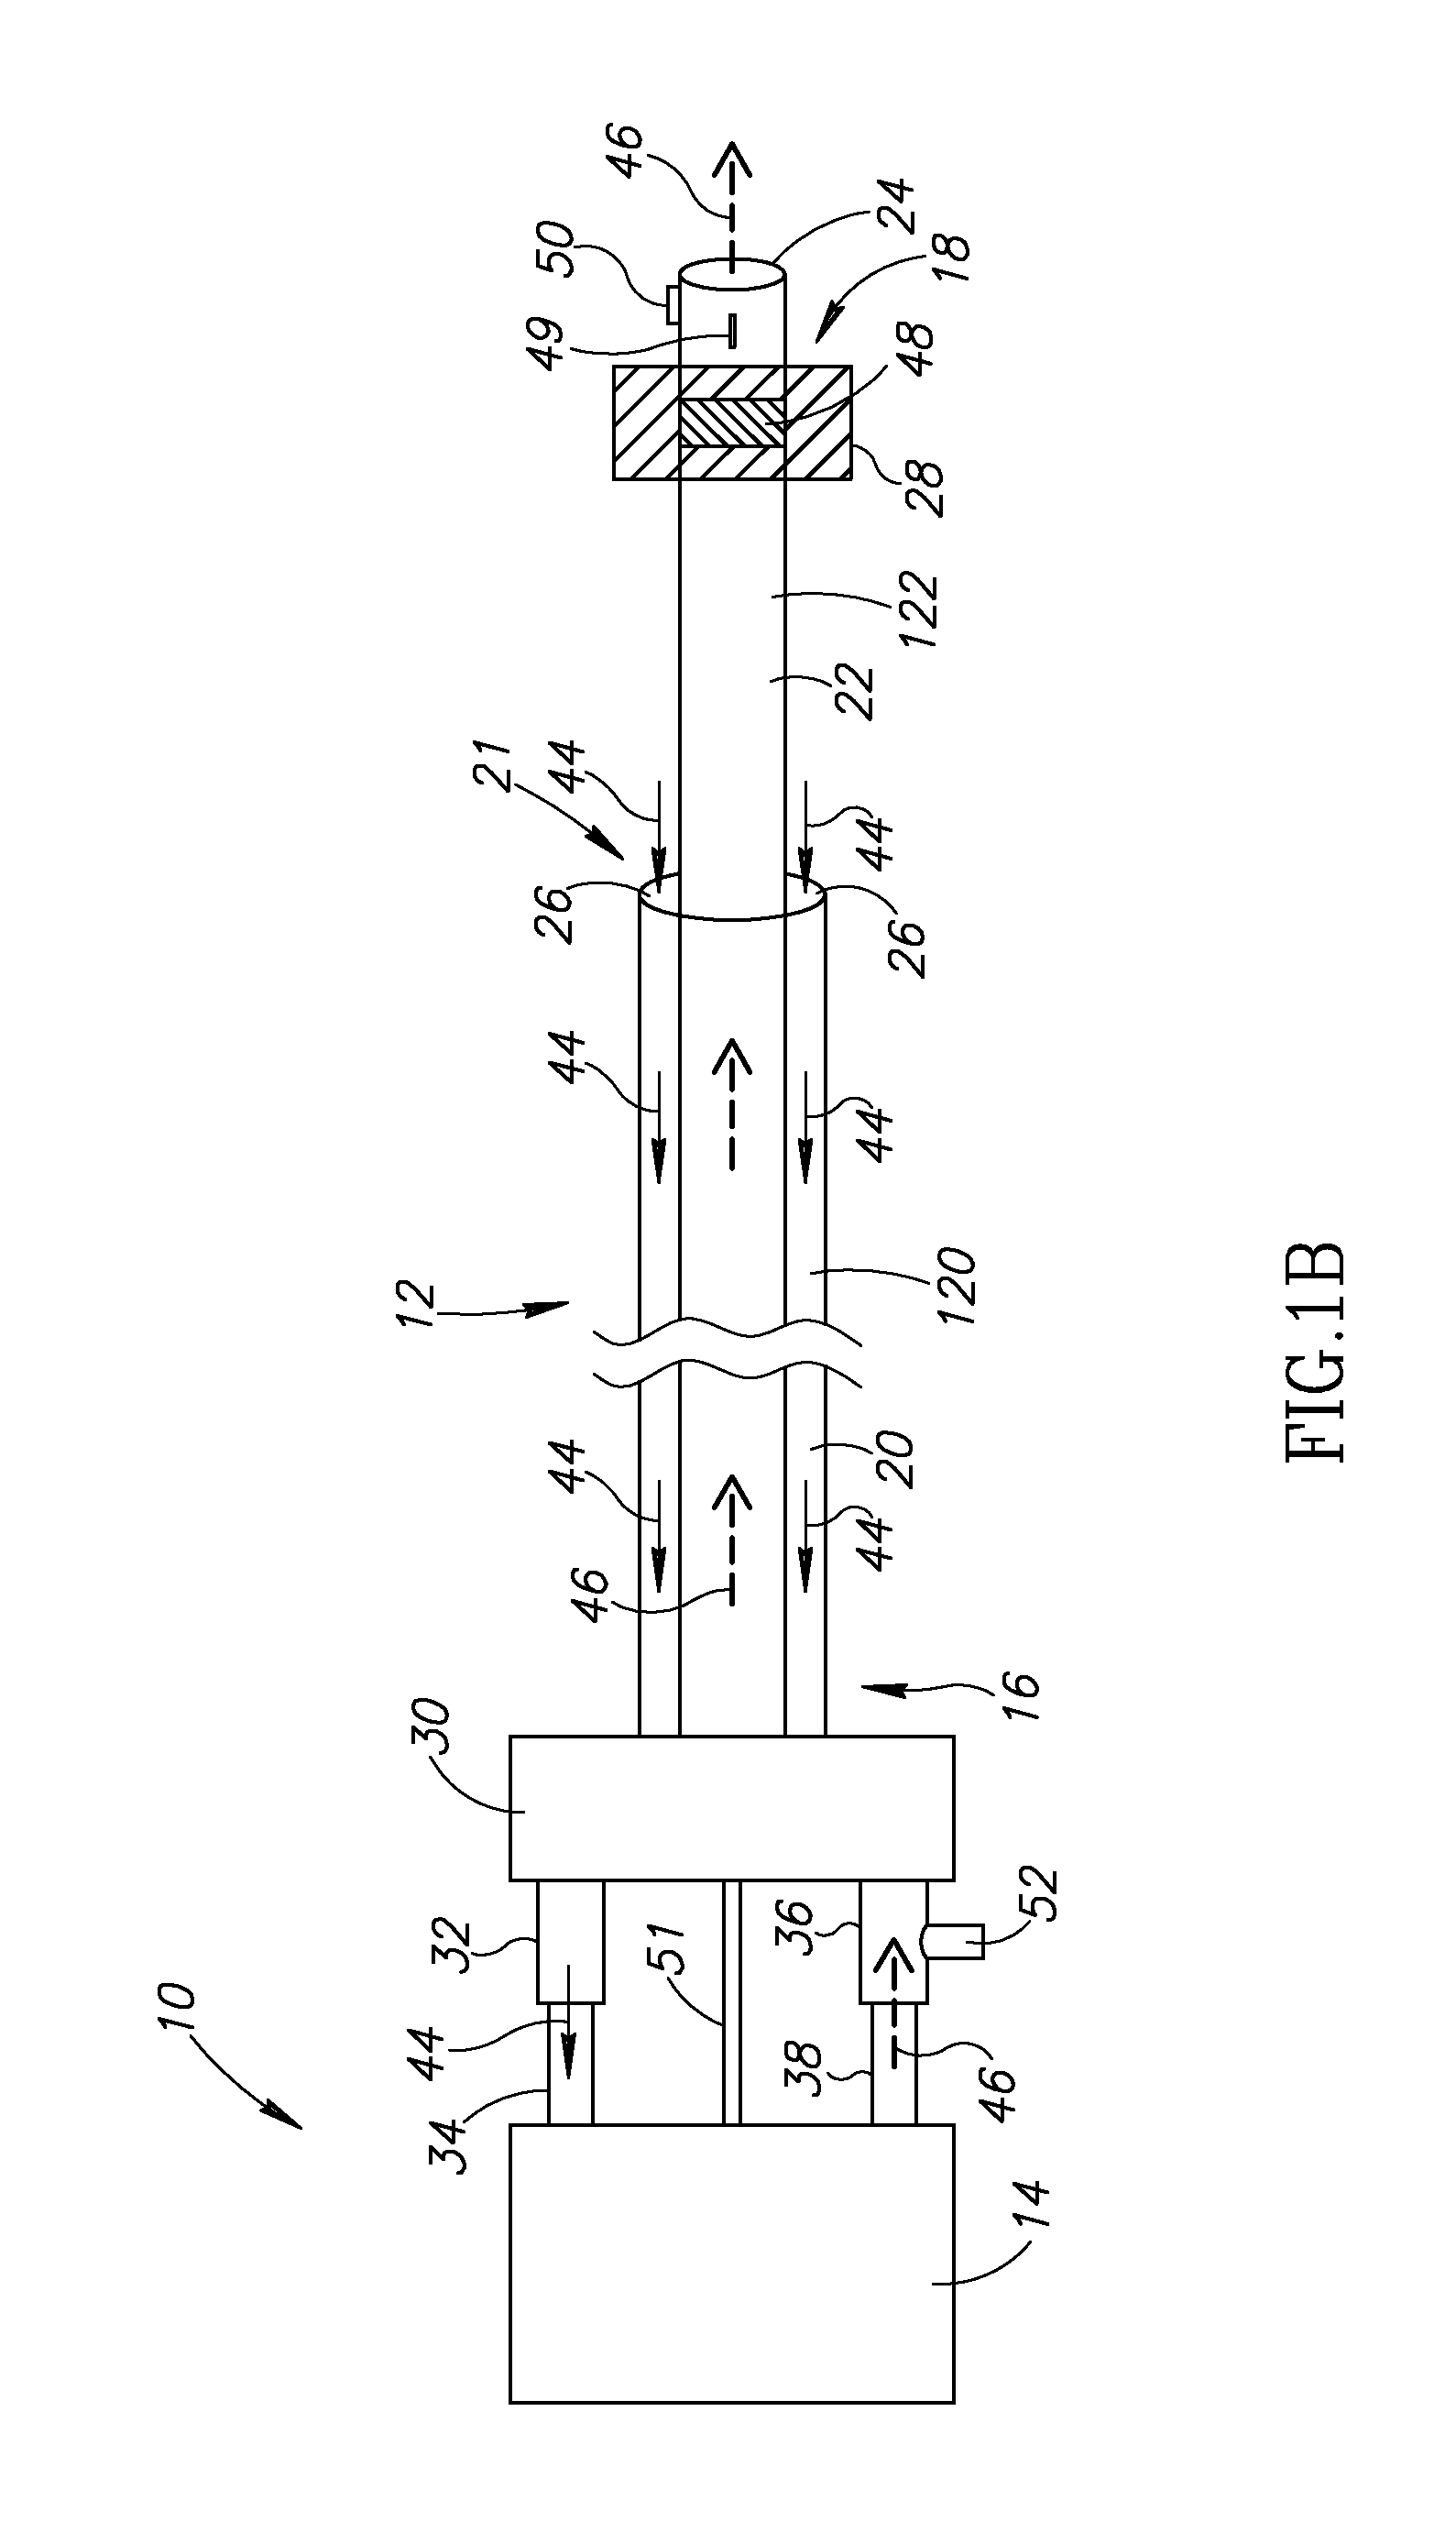 Variable length catheter for drug delivery